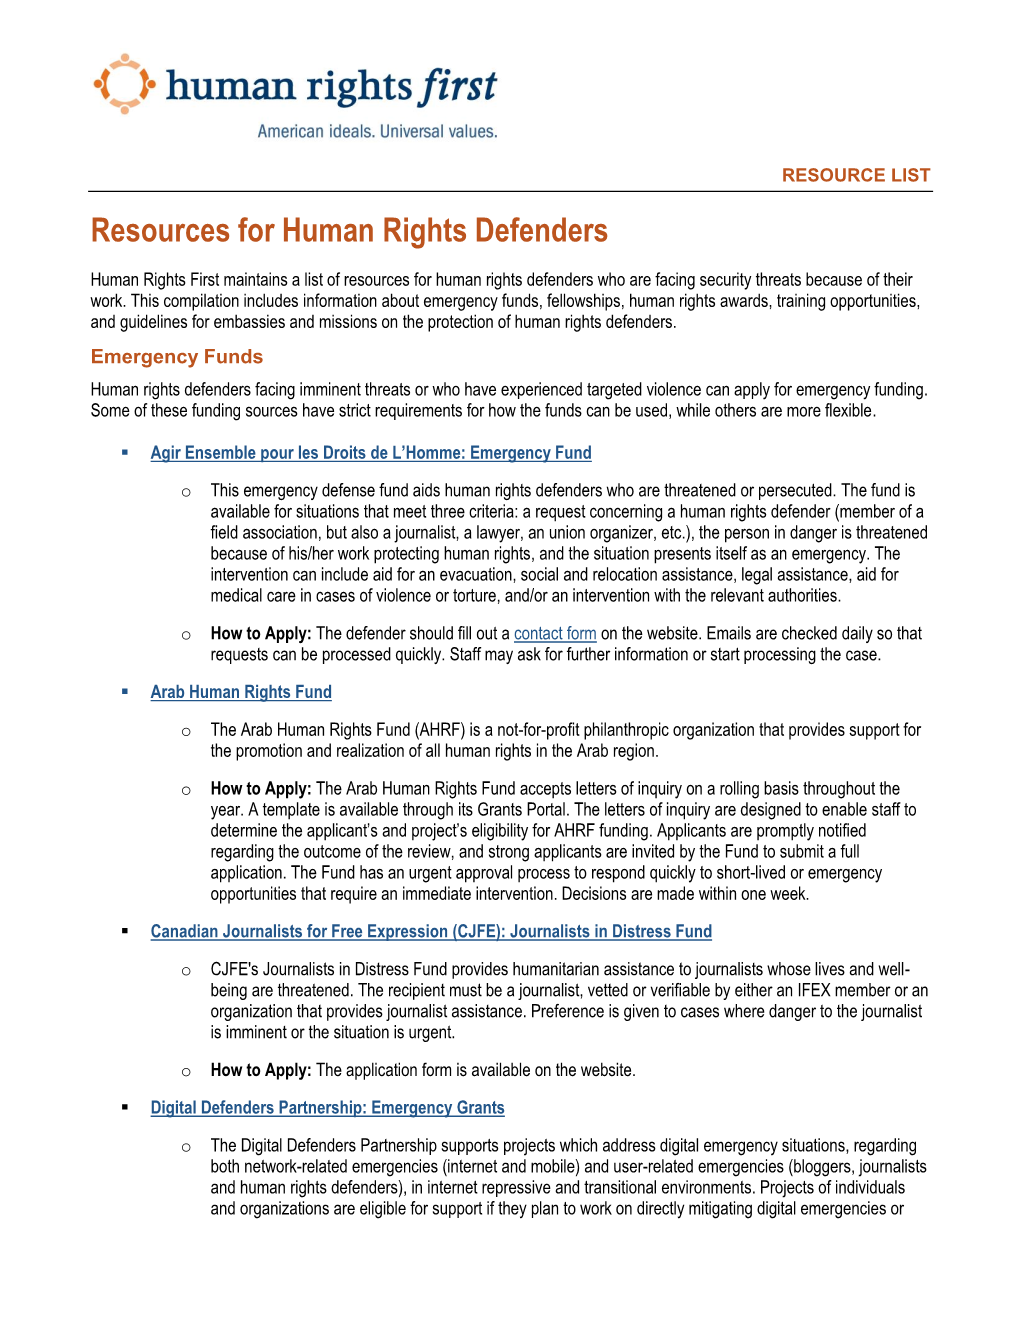 Resources for Human Rights Defenders